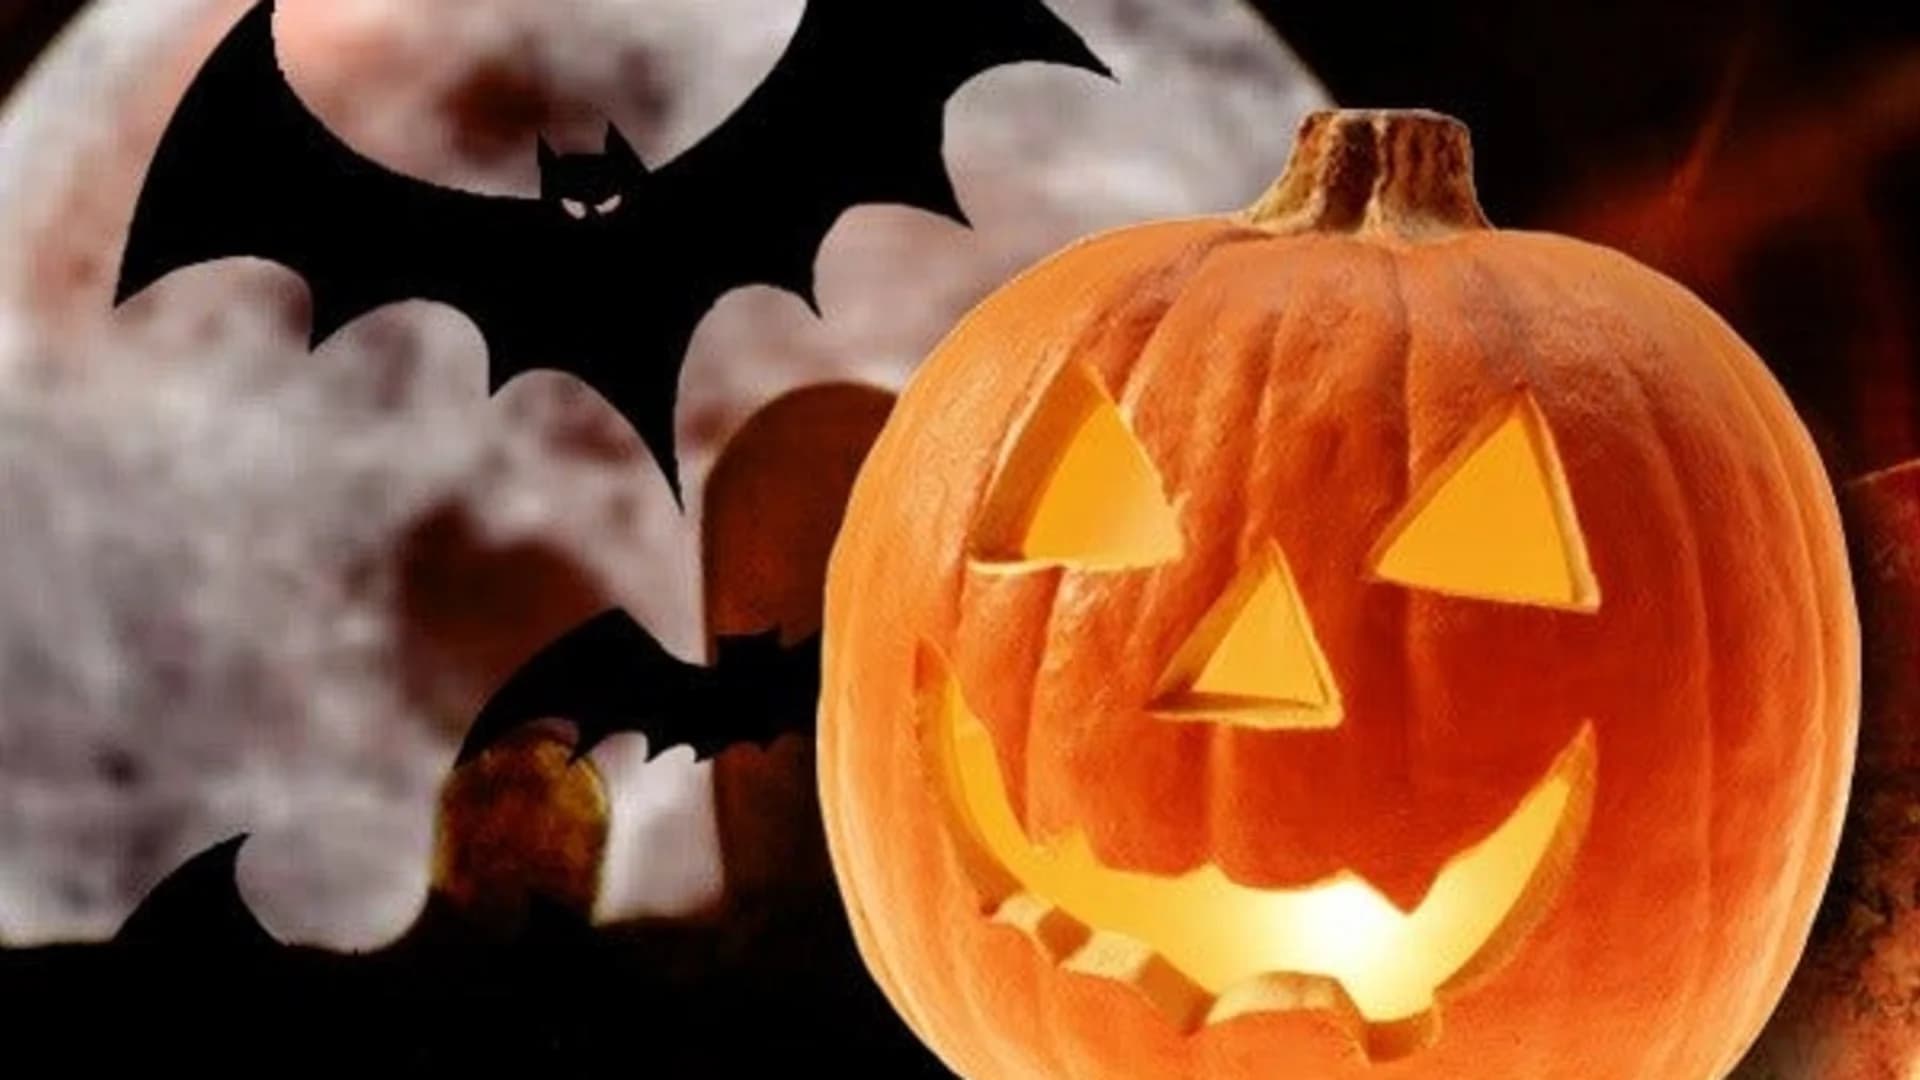 Official: There’s no ordinance putting an age limit on Halloween